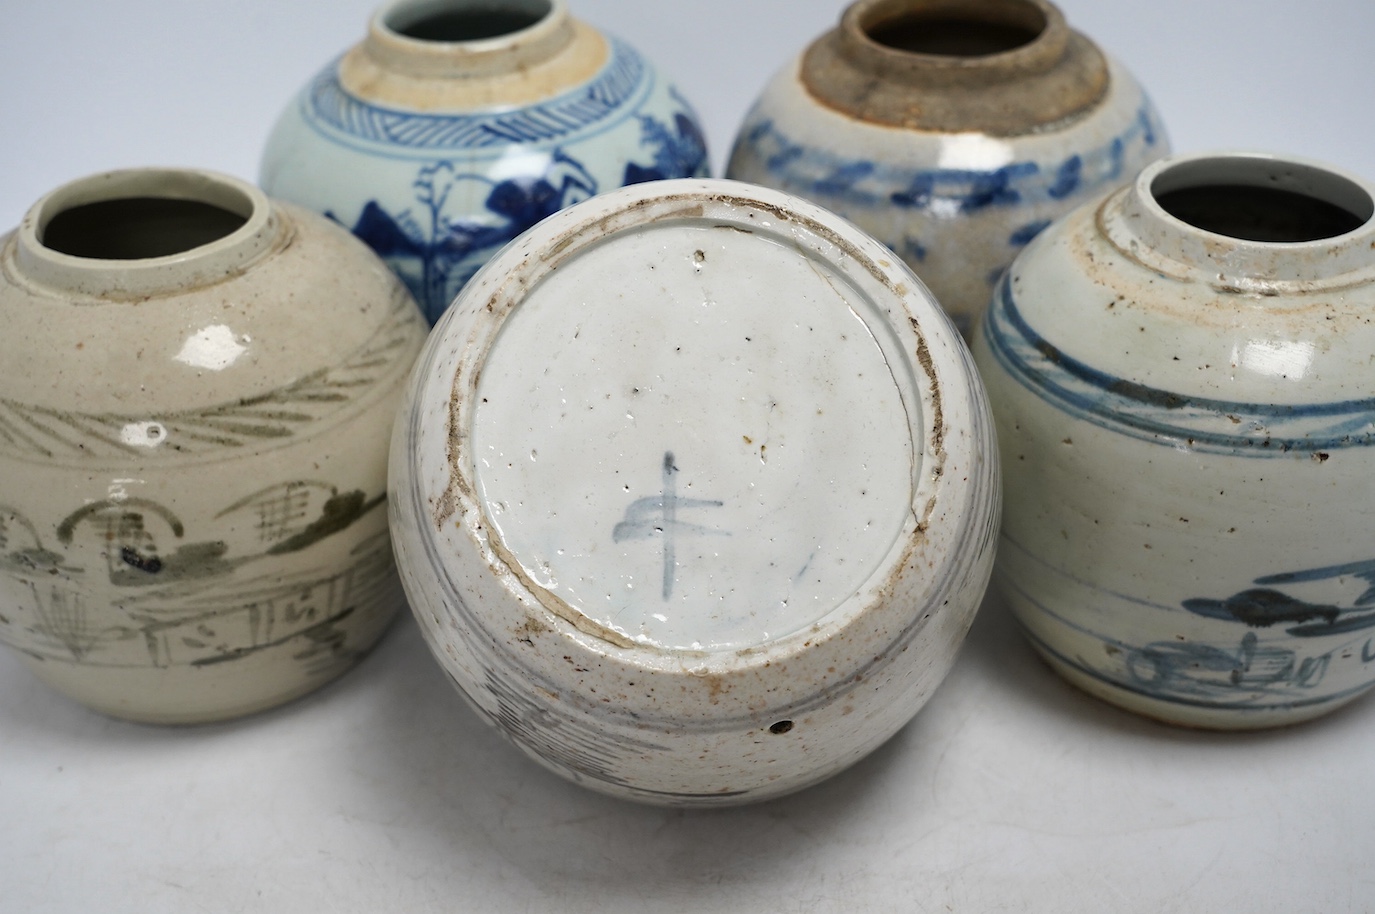 Five 18th/19th century Chinese blue and white ginger jars and two ‘pagoda’ models, tallest 26cm. Condition - fair